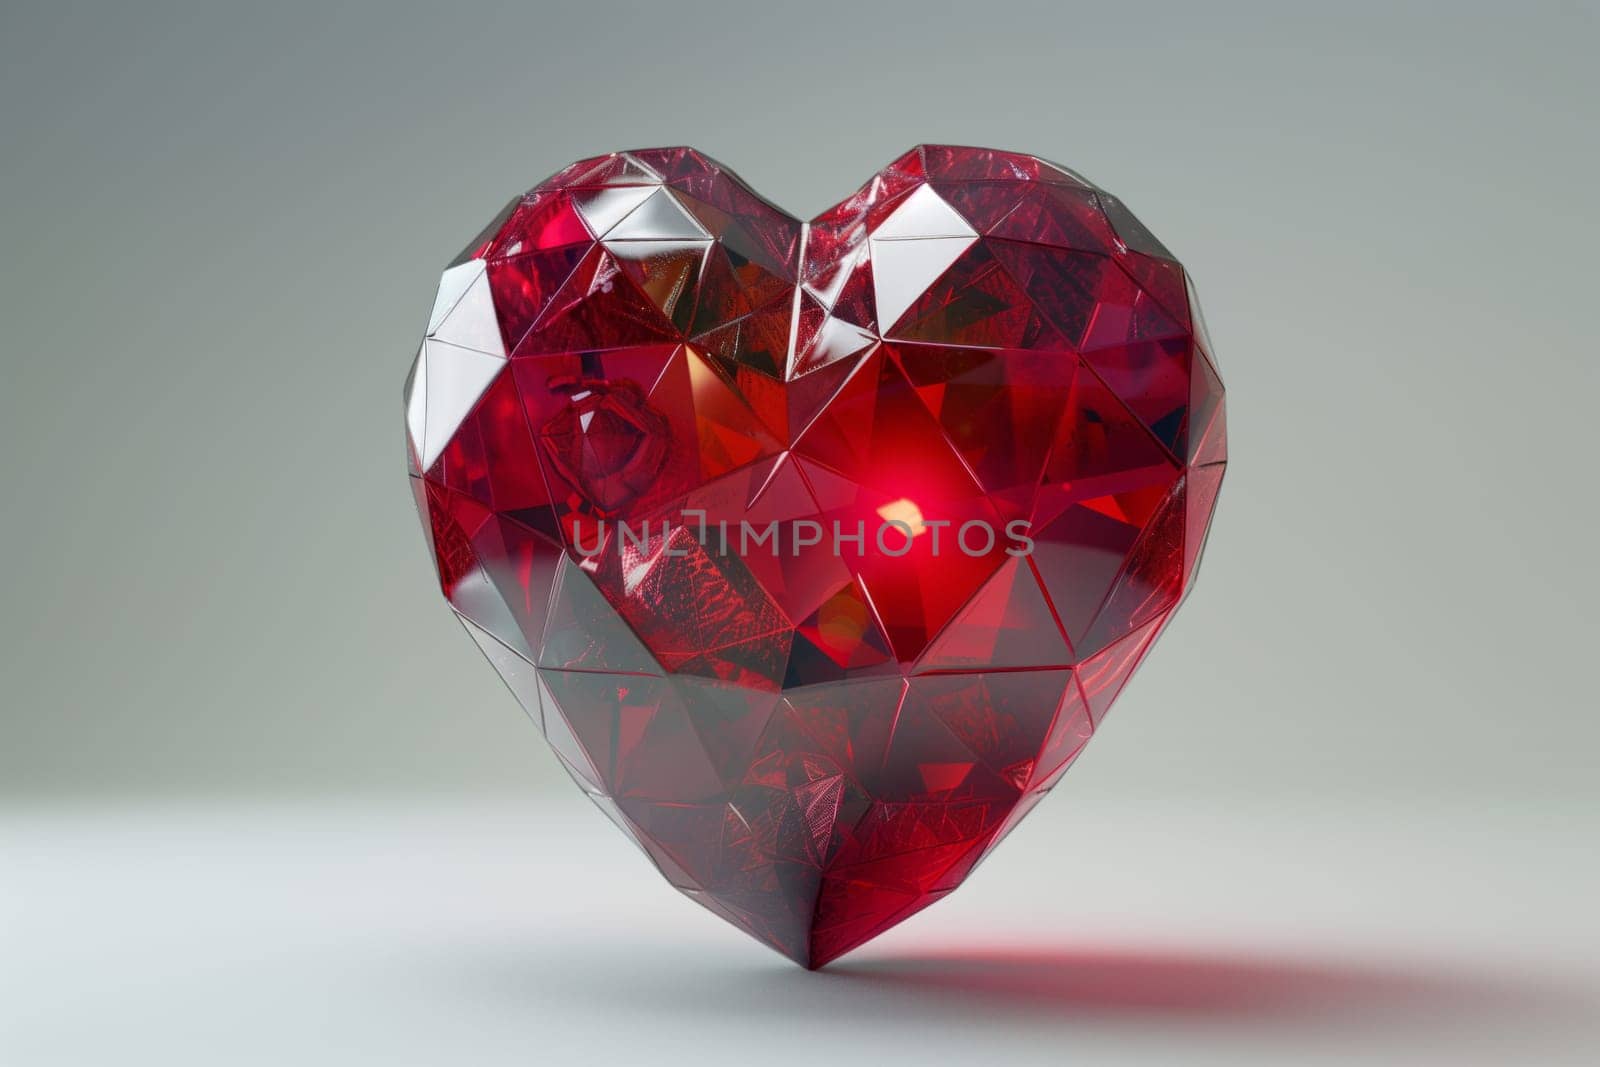 A natural material, red heartshaped diamond is displayed on a white surface, adding a touch of amber and magenta to the creative arts of jewellery design